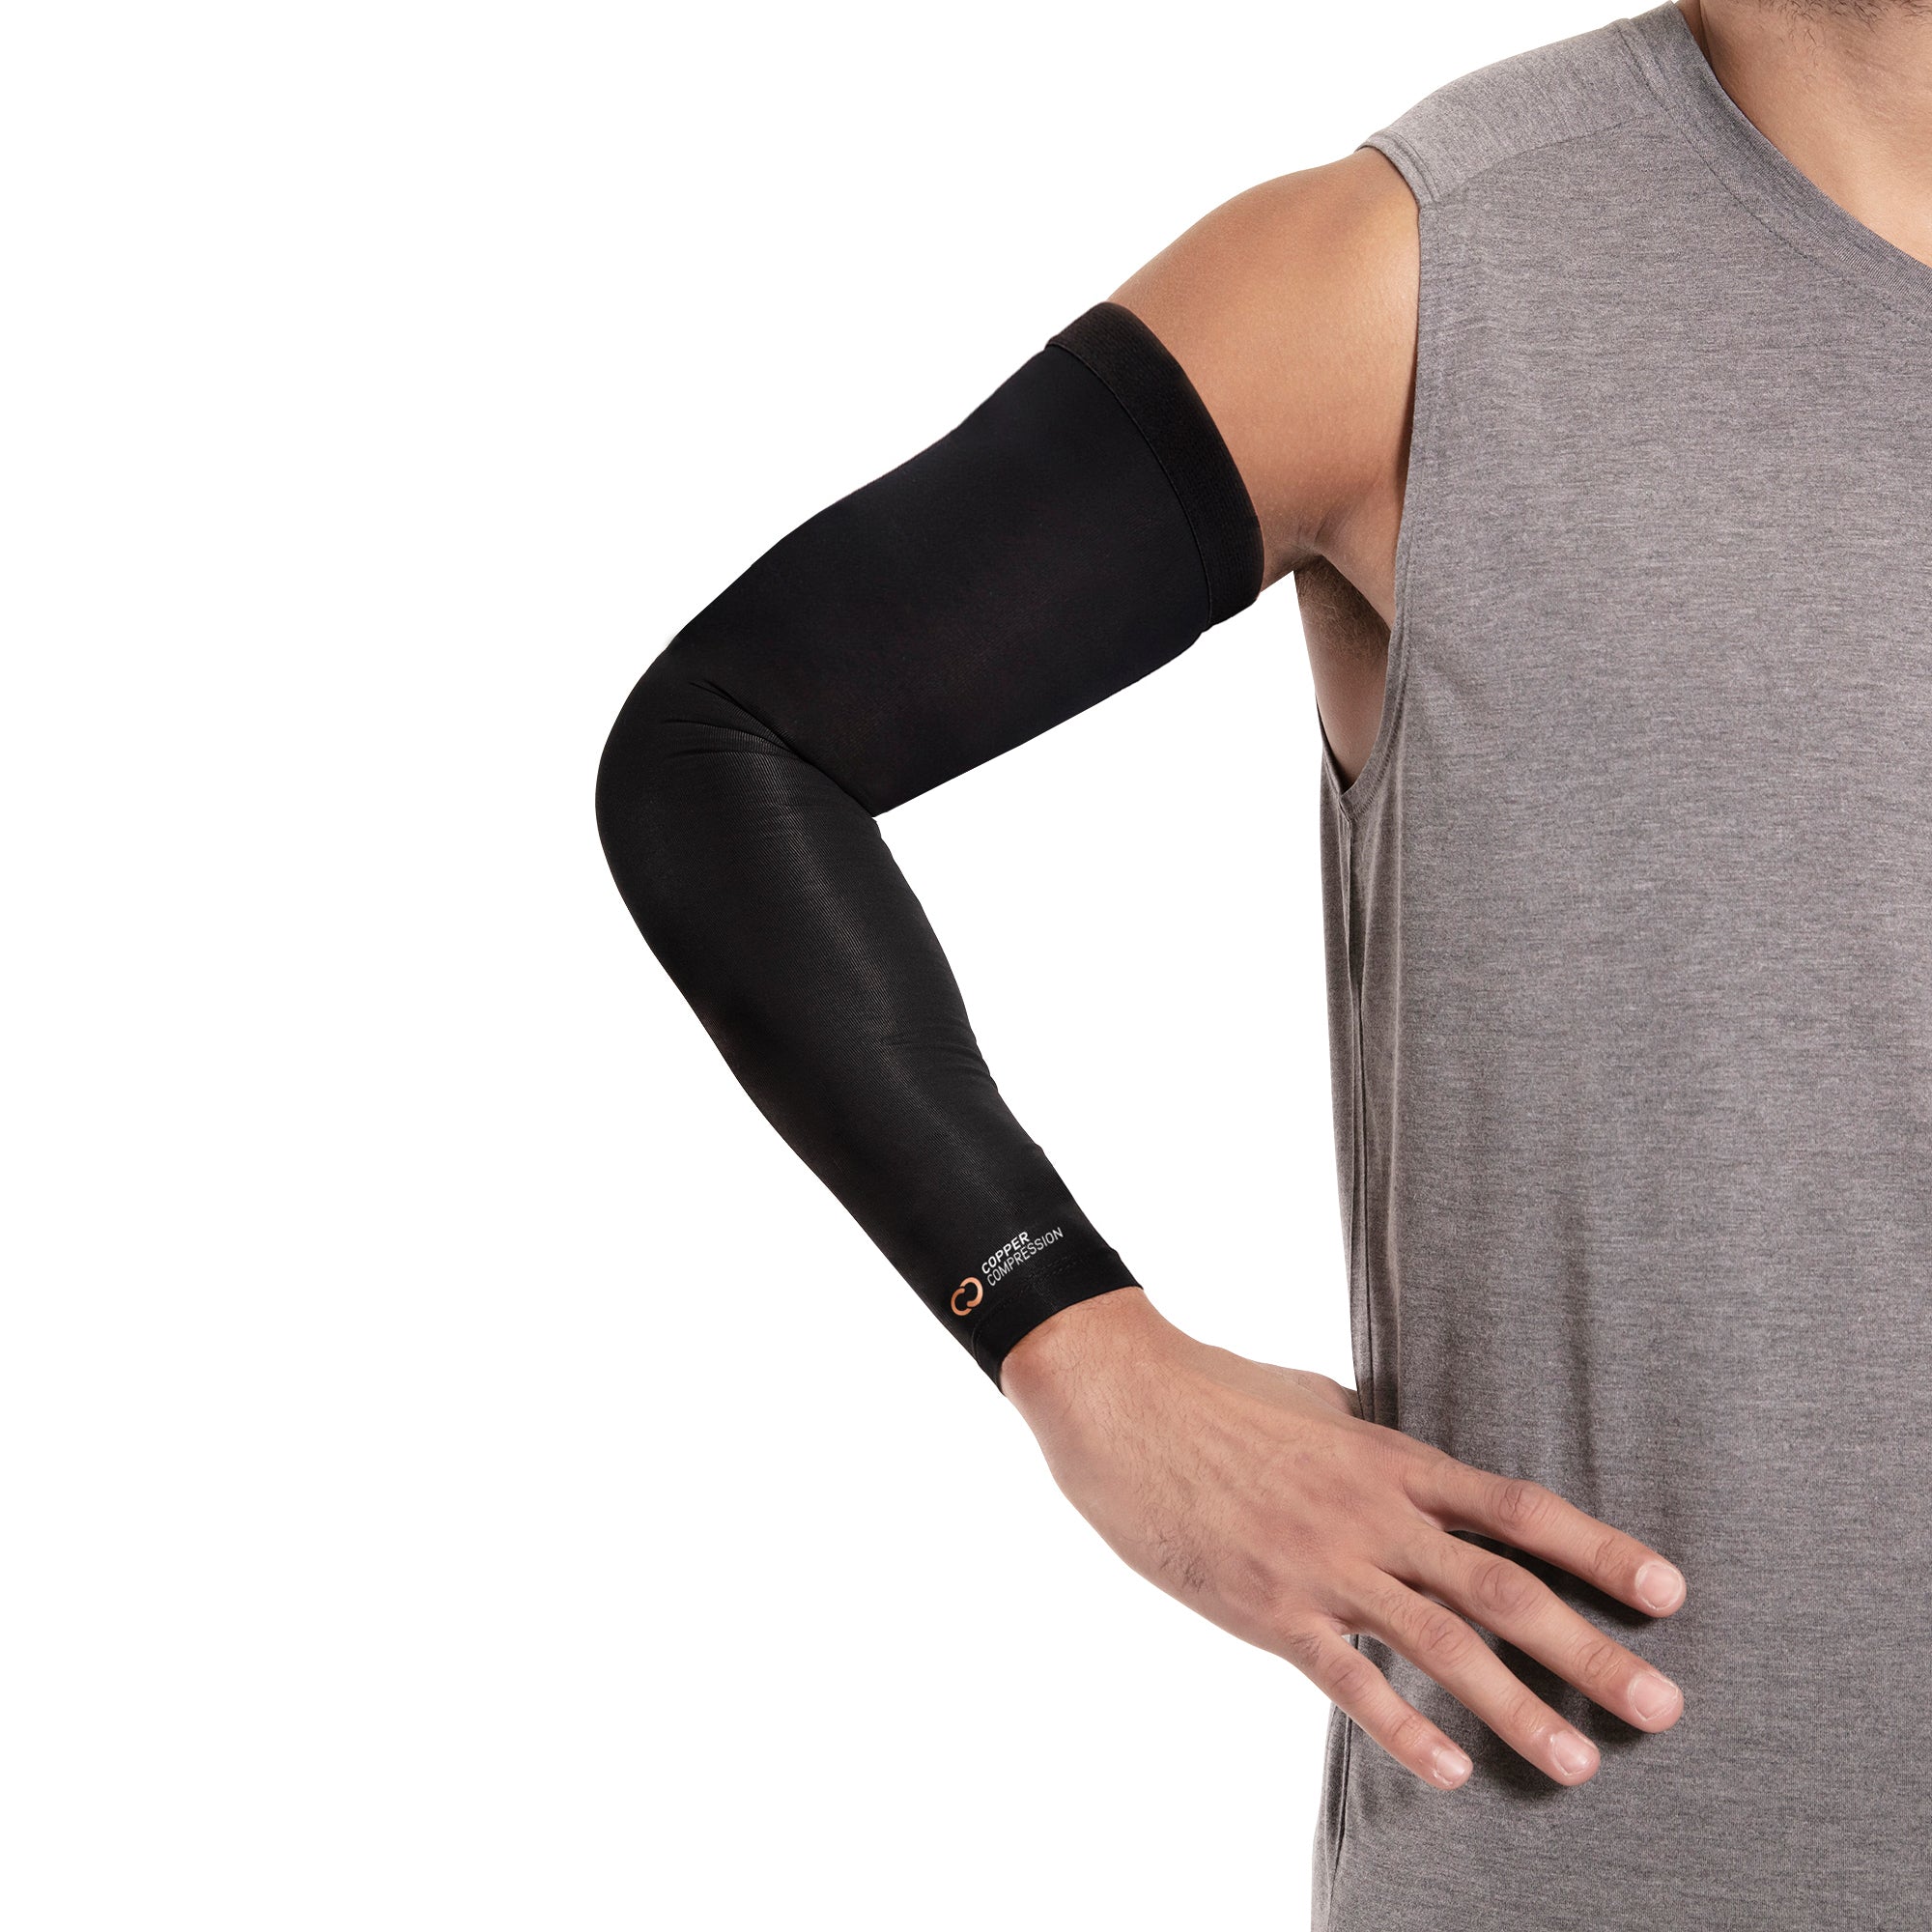 Copper Compression Arm Sleeve for Men and Women